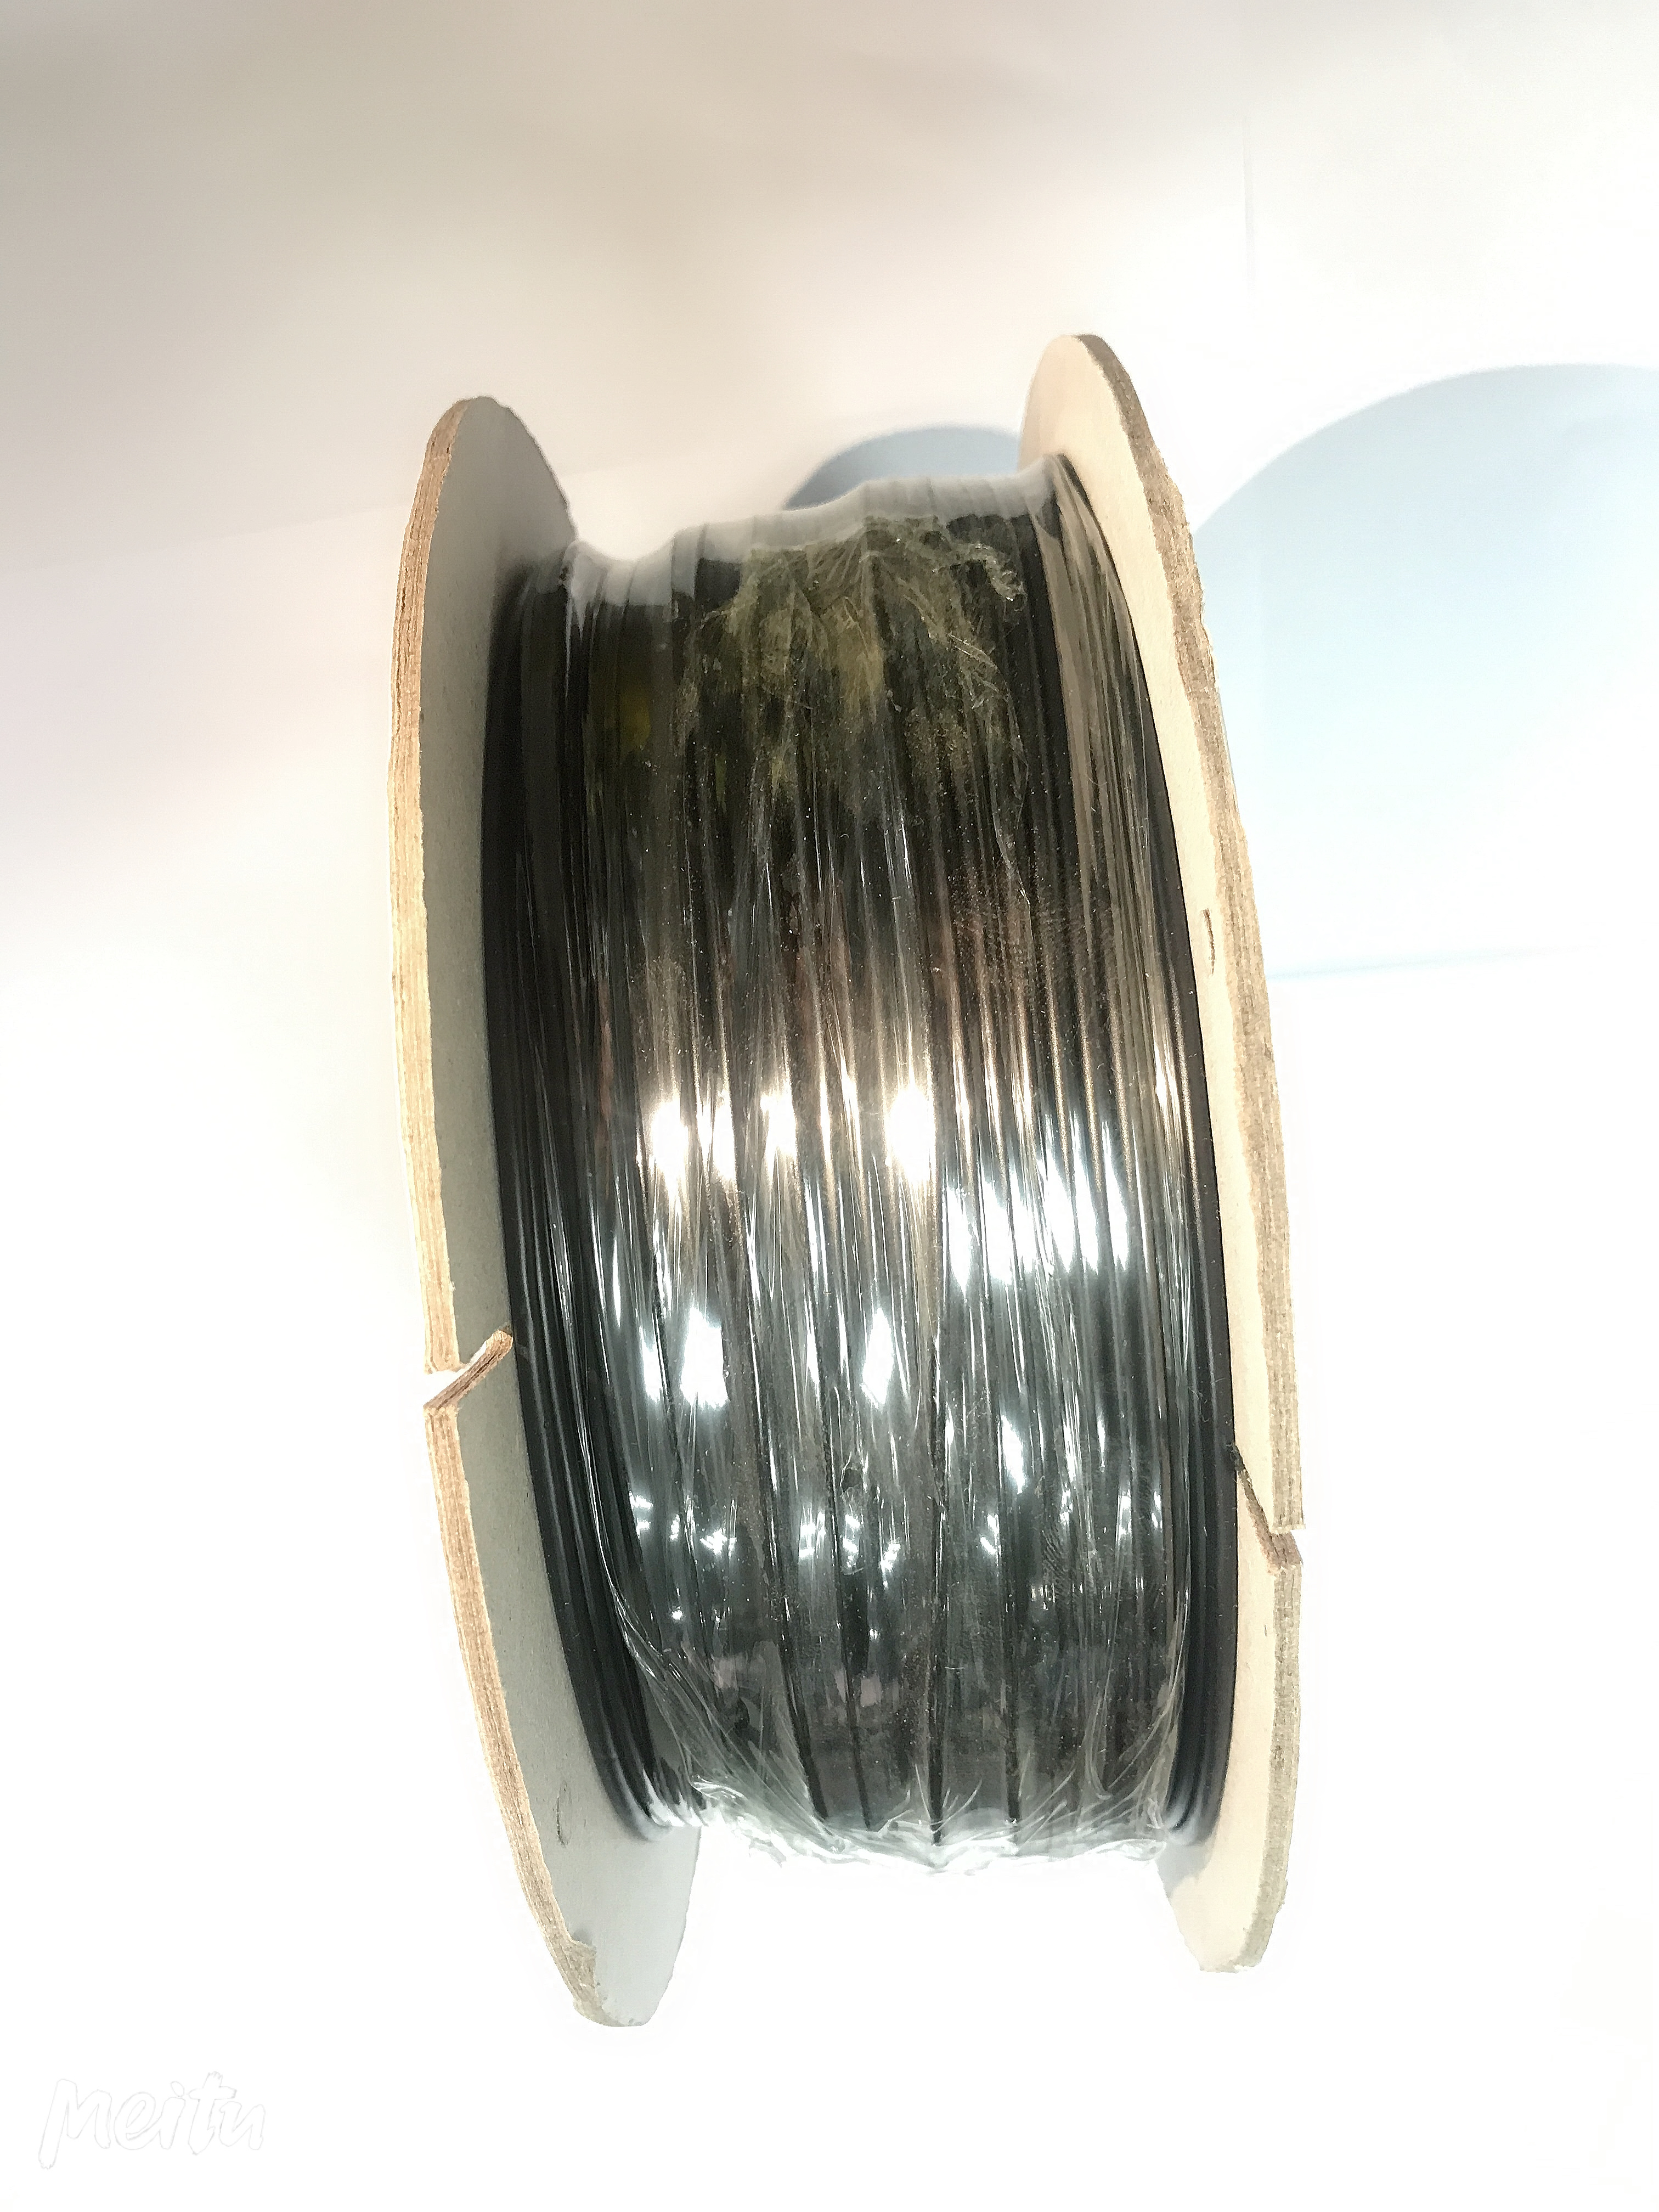 1 Core 0.5mm2 0.75mm2 1mm2 1.5mm2 Or 2.5mm2 4mm2 6mm2 Copper Single Core Pvc Hous Flexible Electr Power Cabl And Wire Price 